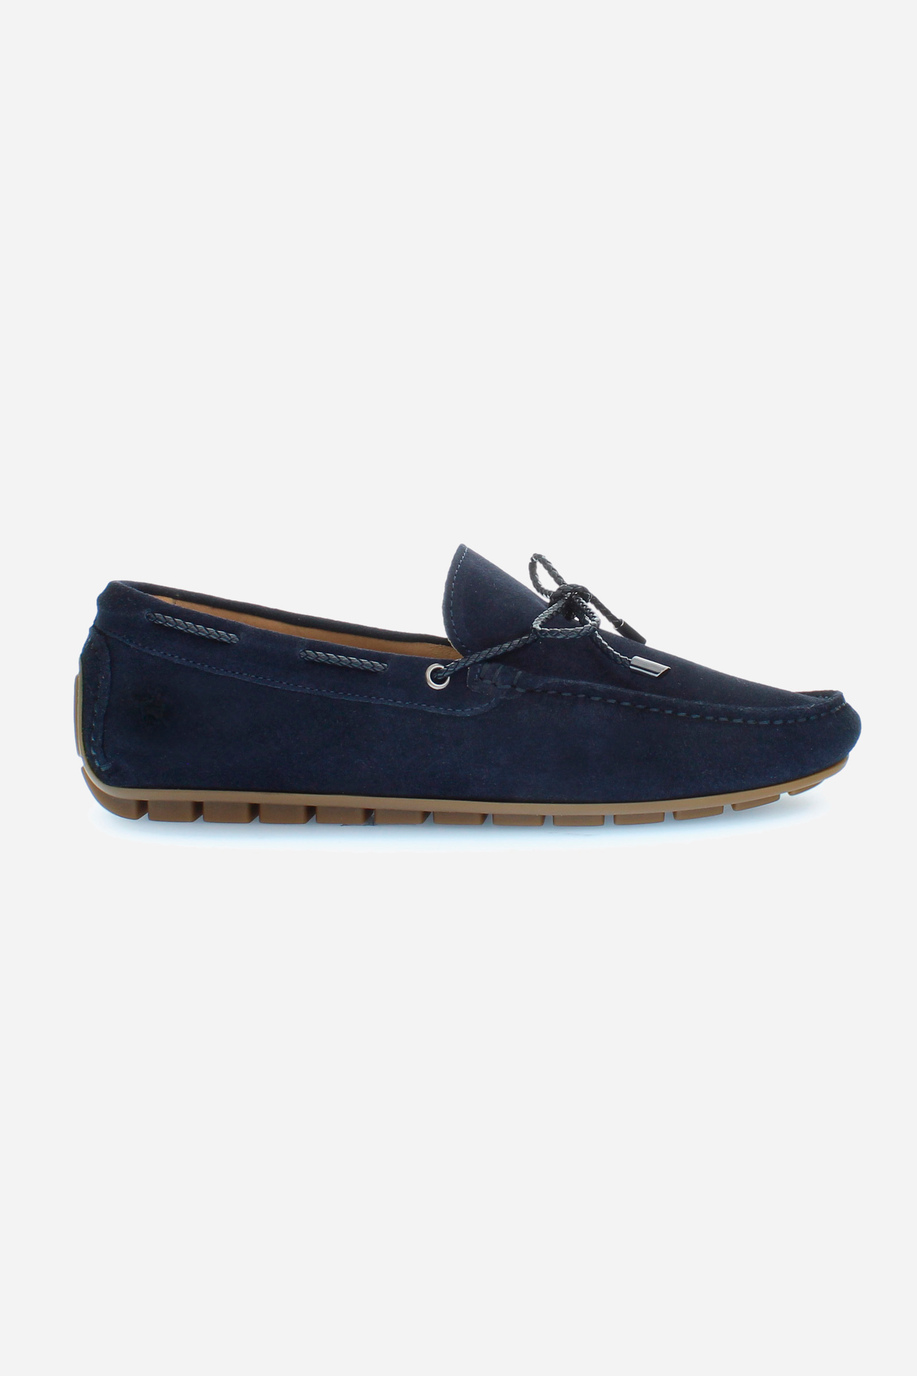 Men's suede loafers with laces - Footwear | La Martina - Official Online Shop